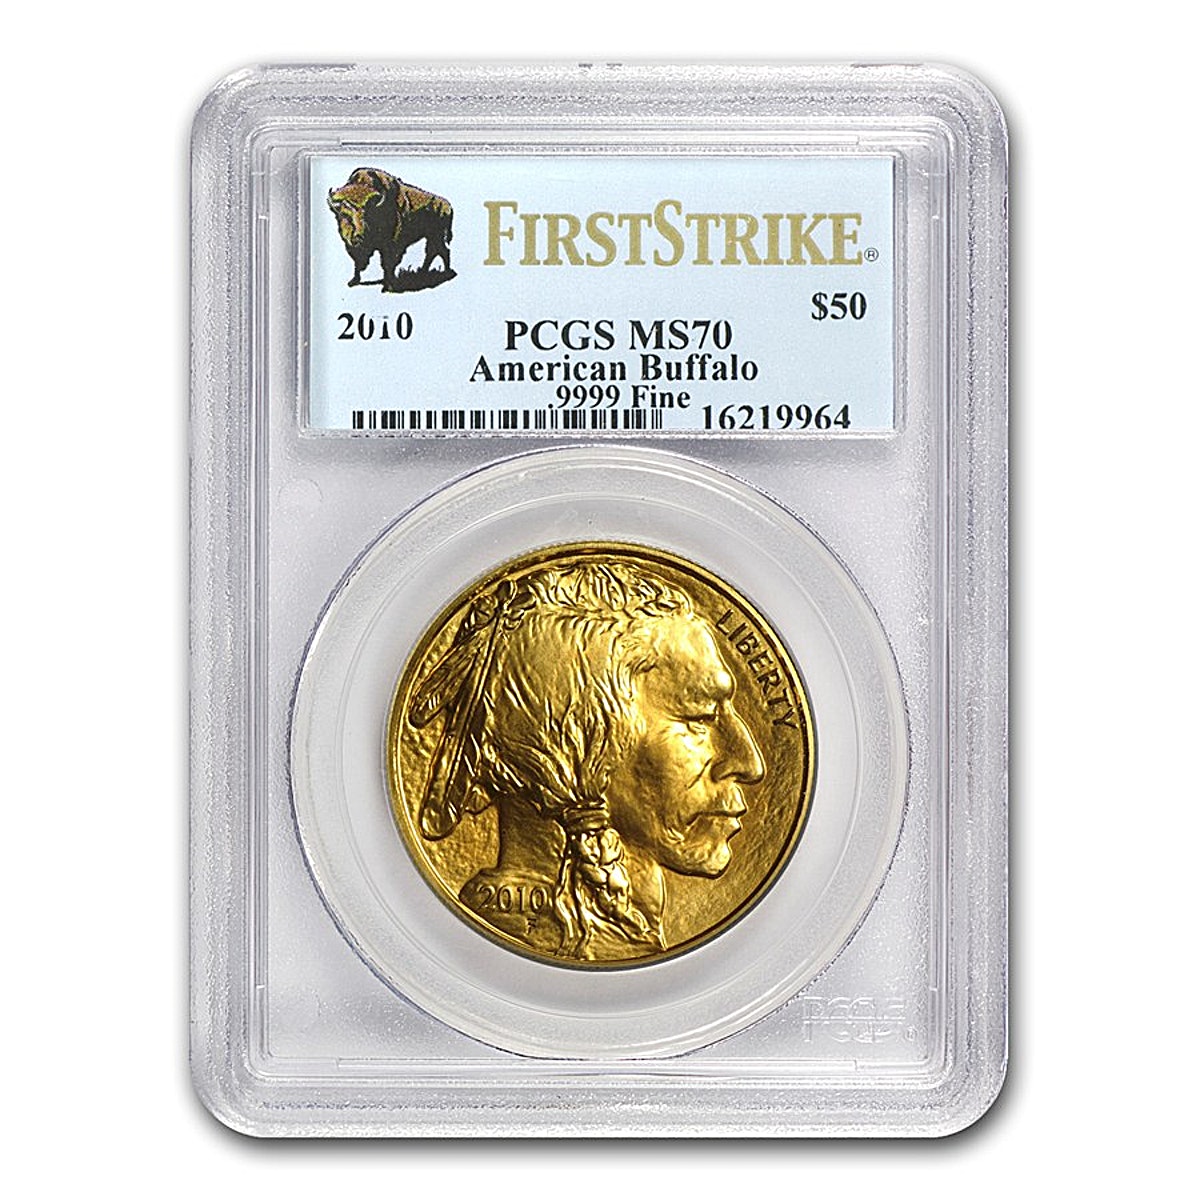 American Gold Buffalo 2010 - First Strike - Graded MS 70 by NGC - 1 oz